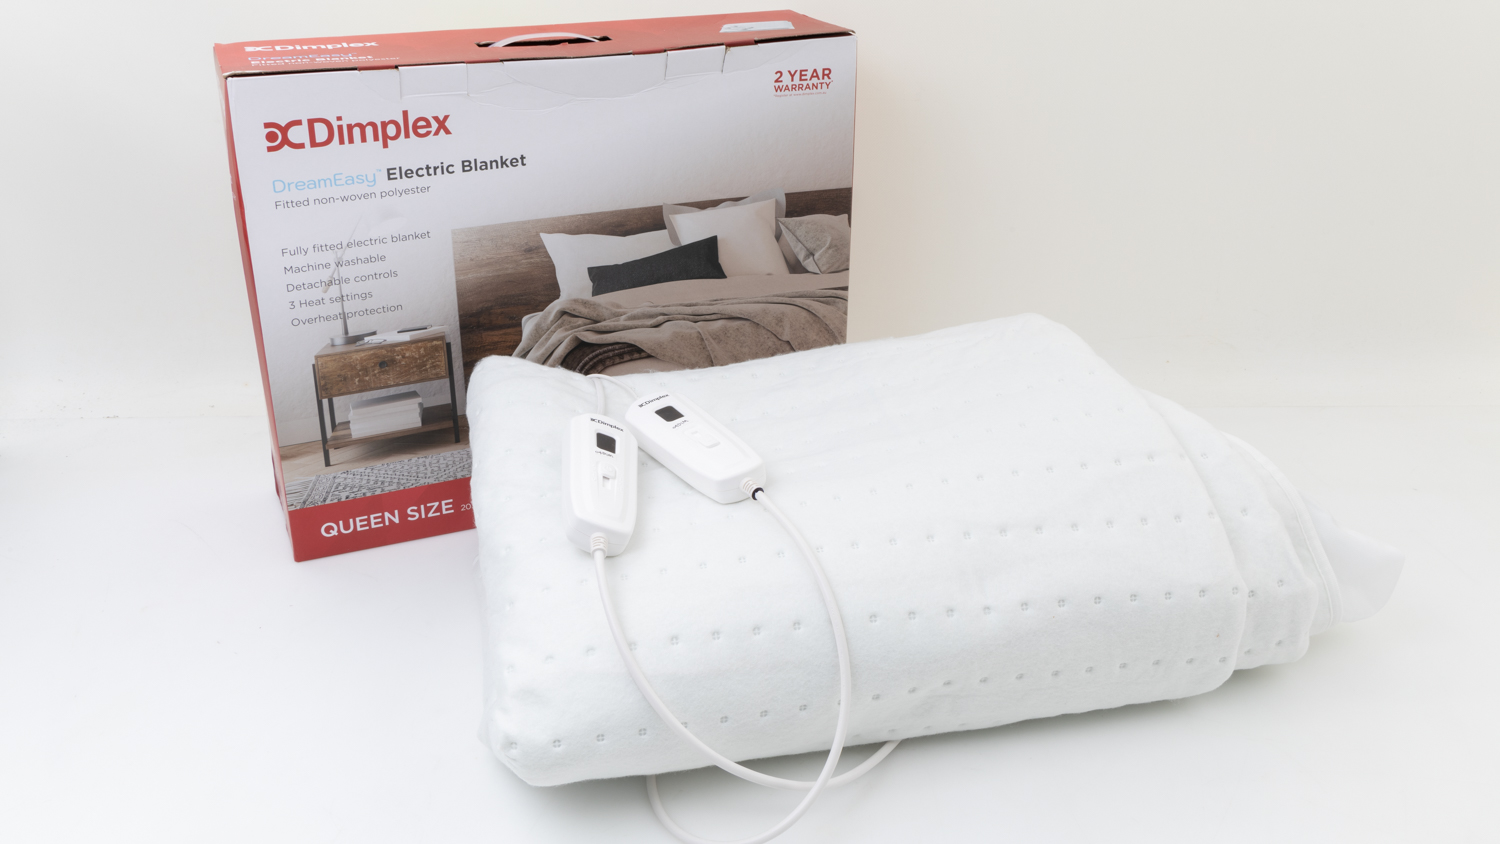 Dimplex DreamEasy Electric Blanket DHDEPQ carousel image